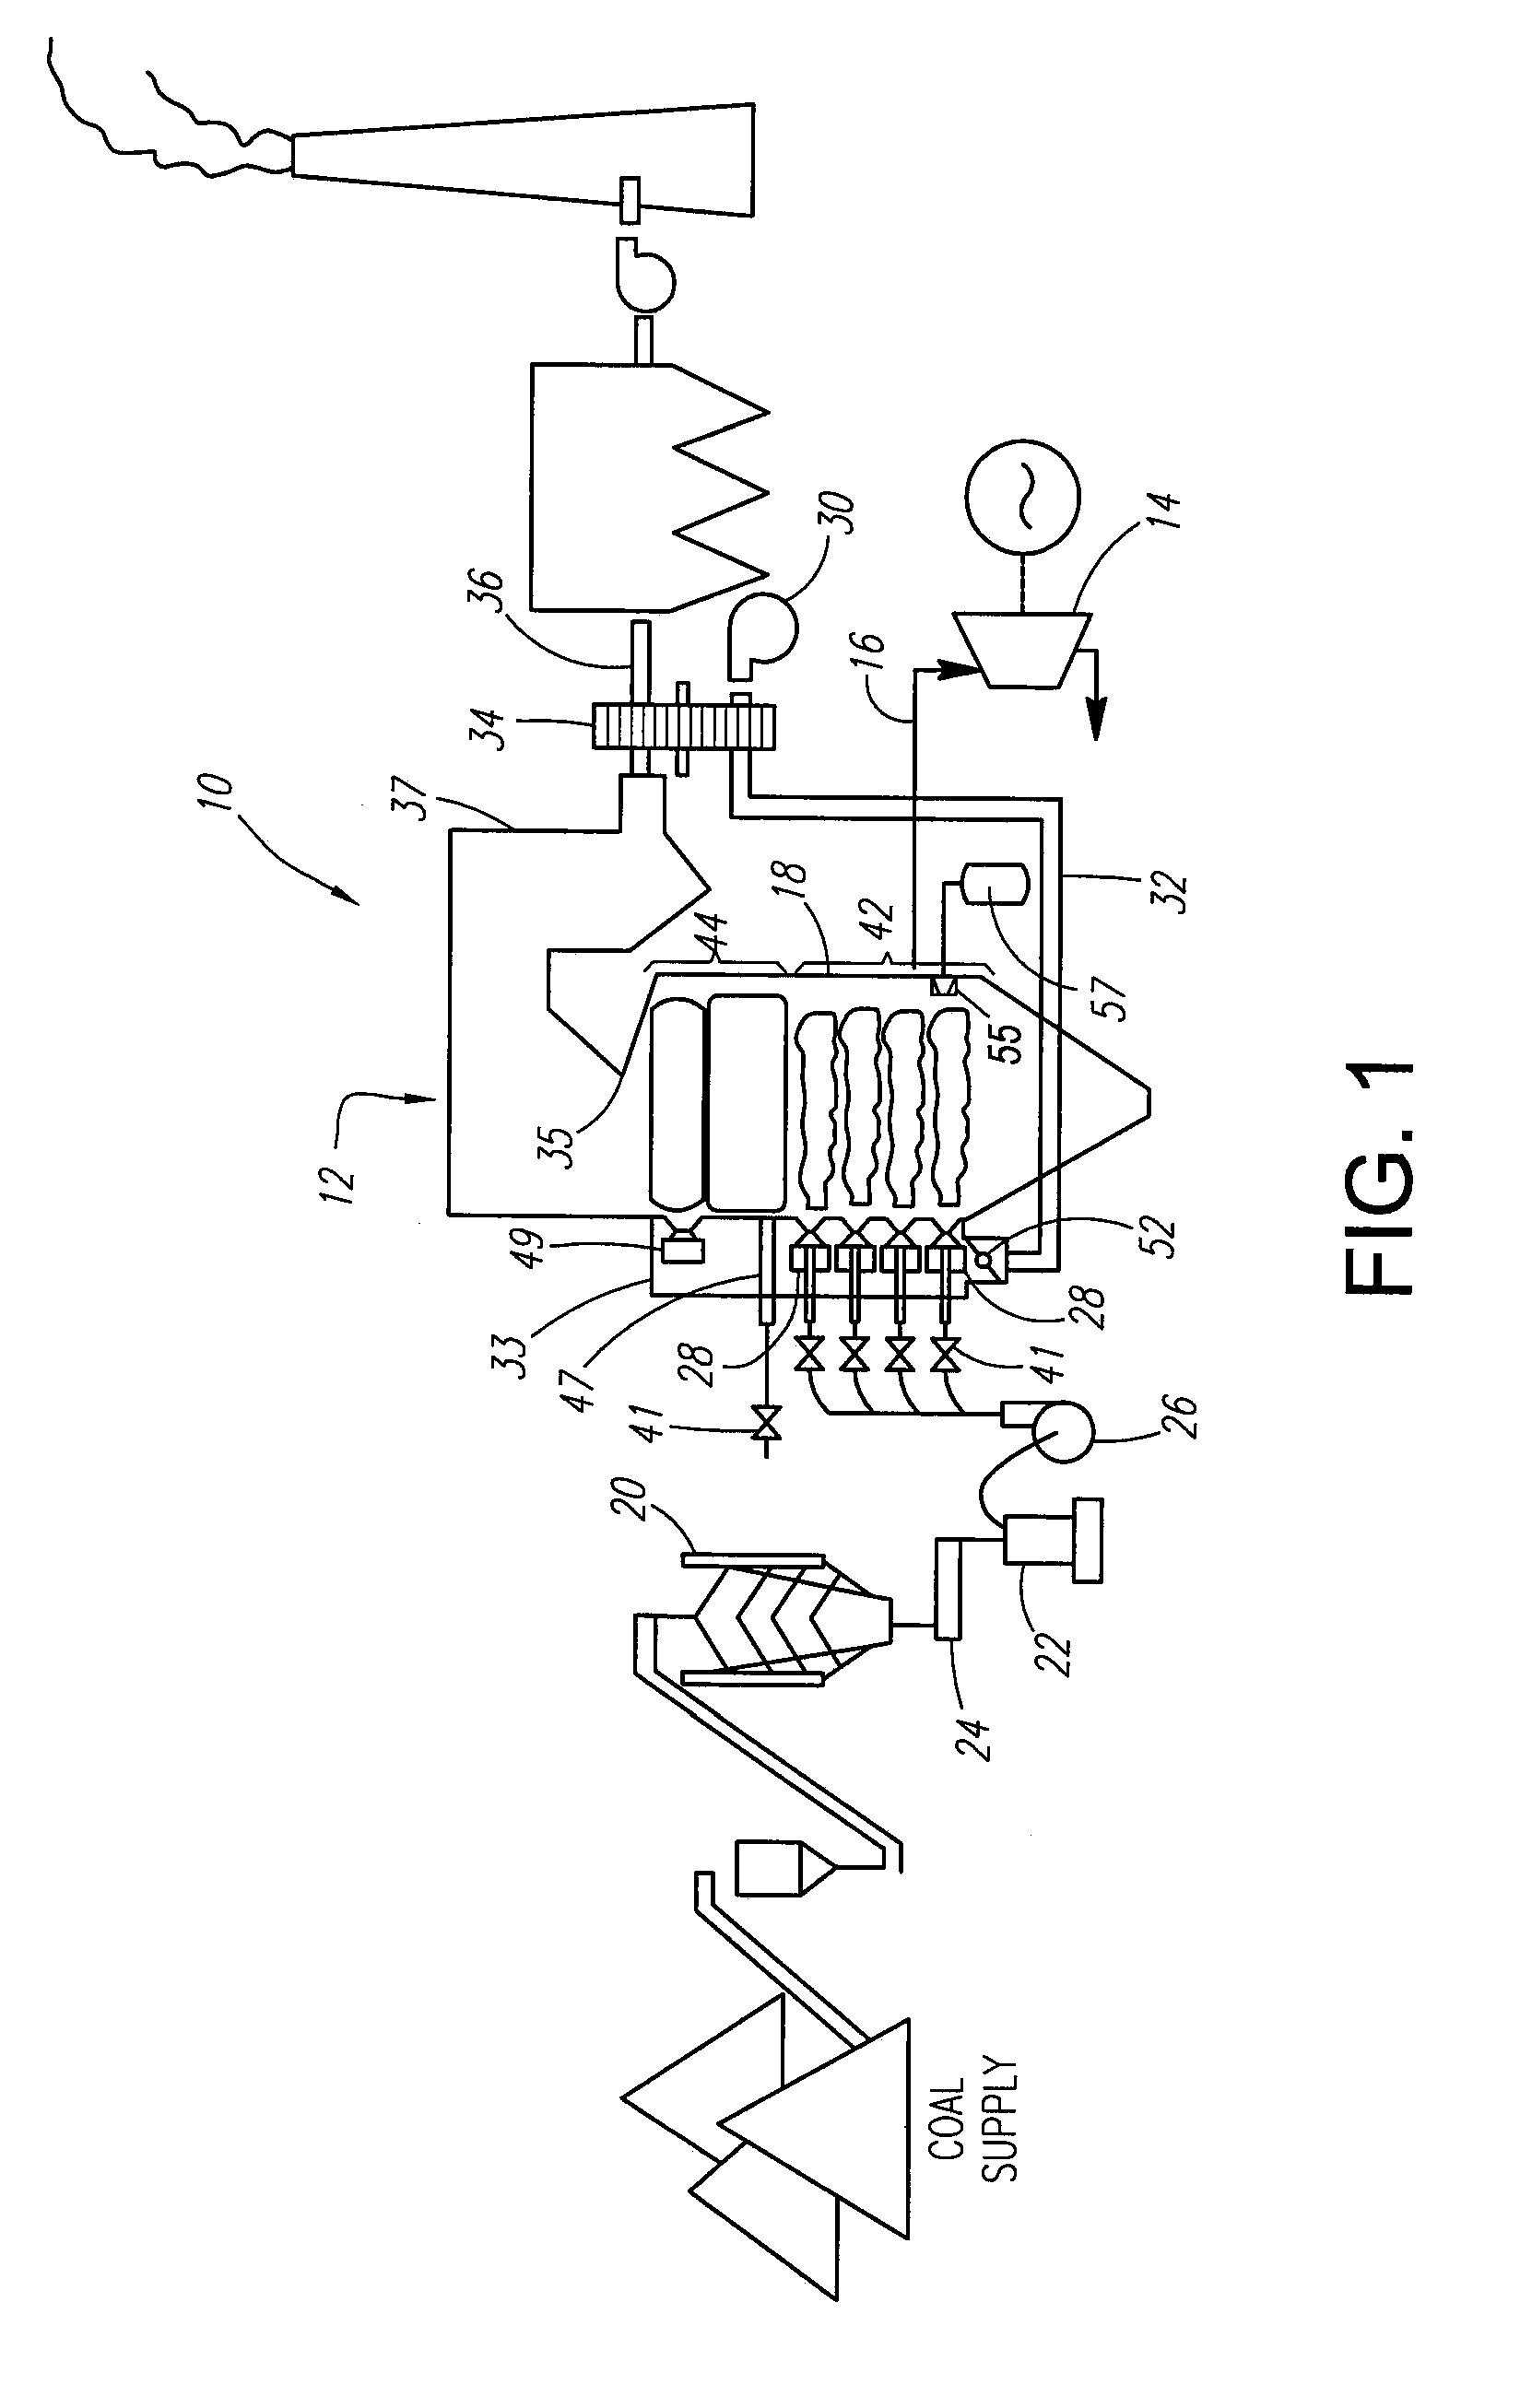 System for combustion optimization using quantum cascade lasers